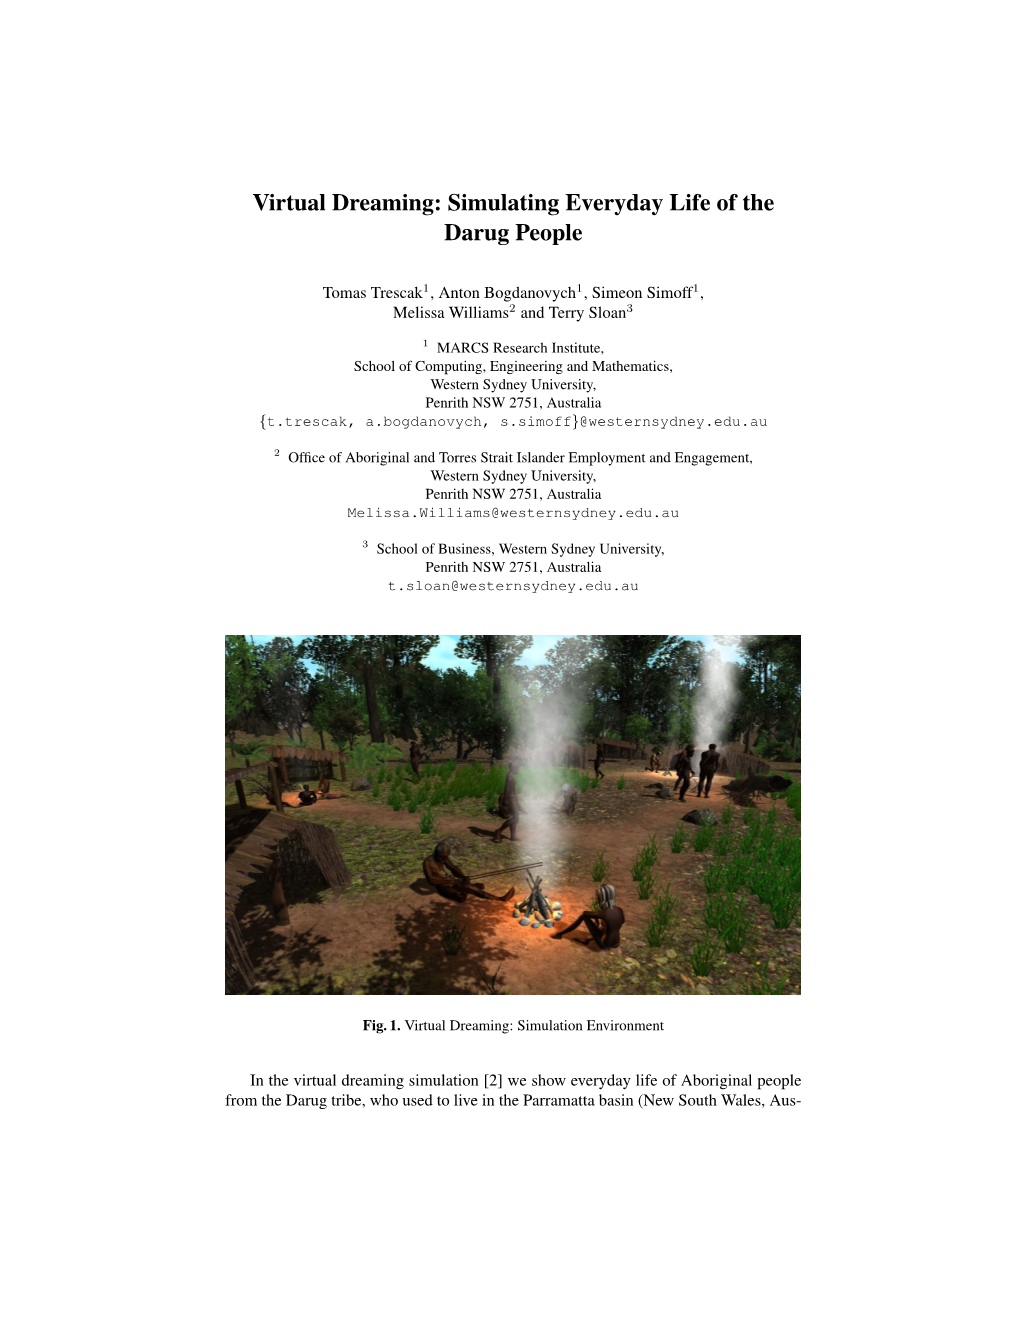 Virtual Dreaming: Simulating Everyday Life of the Darug People